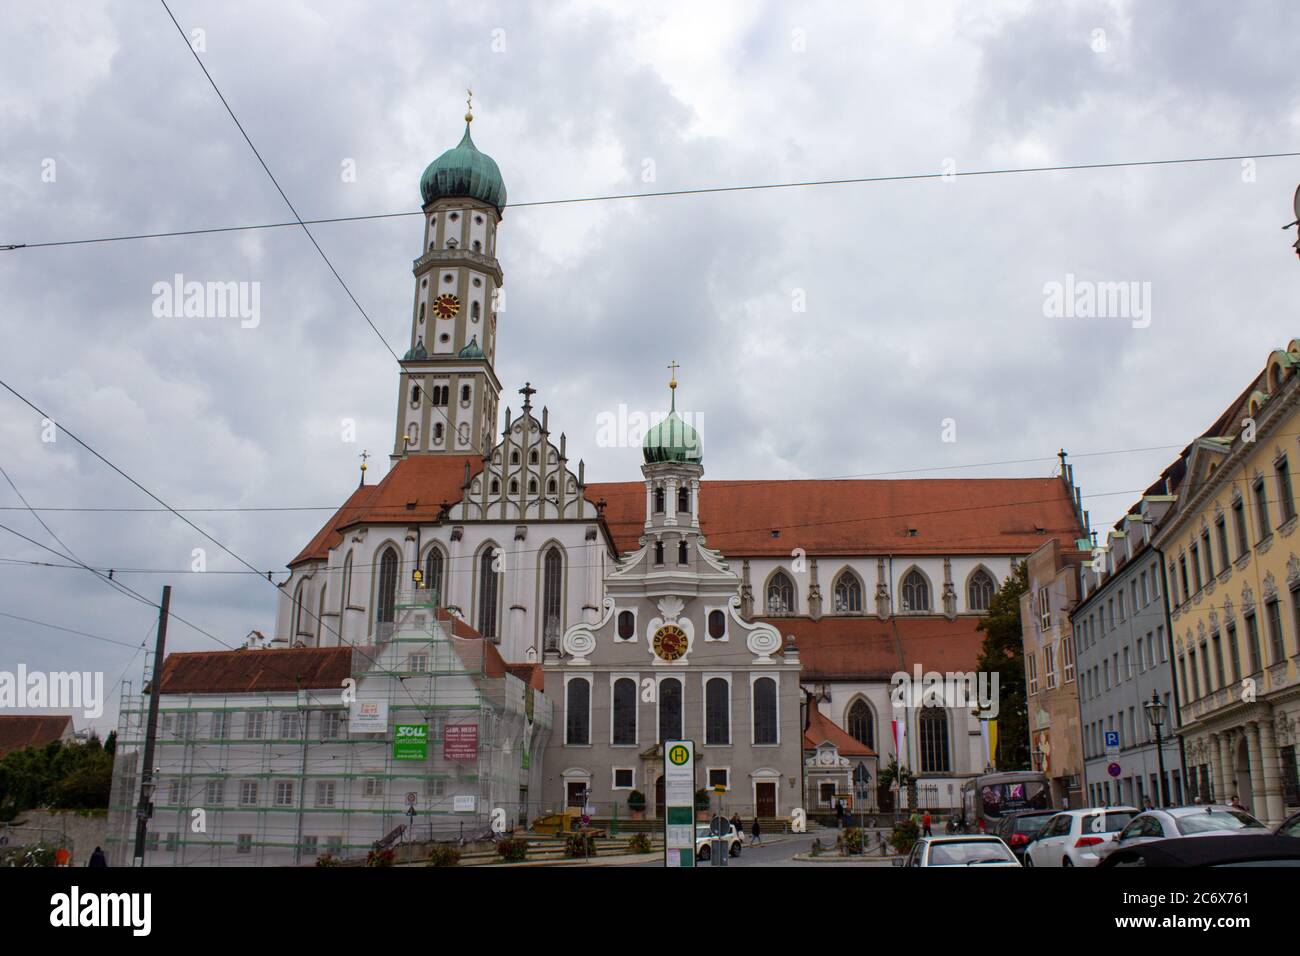 Facade of the St. Ulrich and St. Afra's Abbey in Augsburg, Bavaria, Germany. Long history monastery and Basilica. Stock Photo